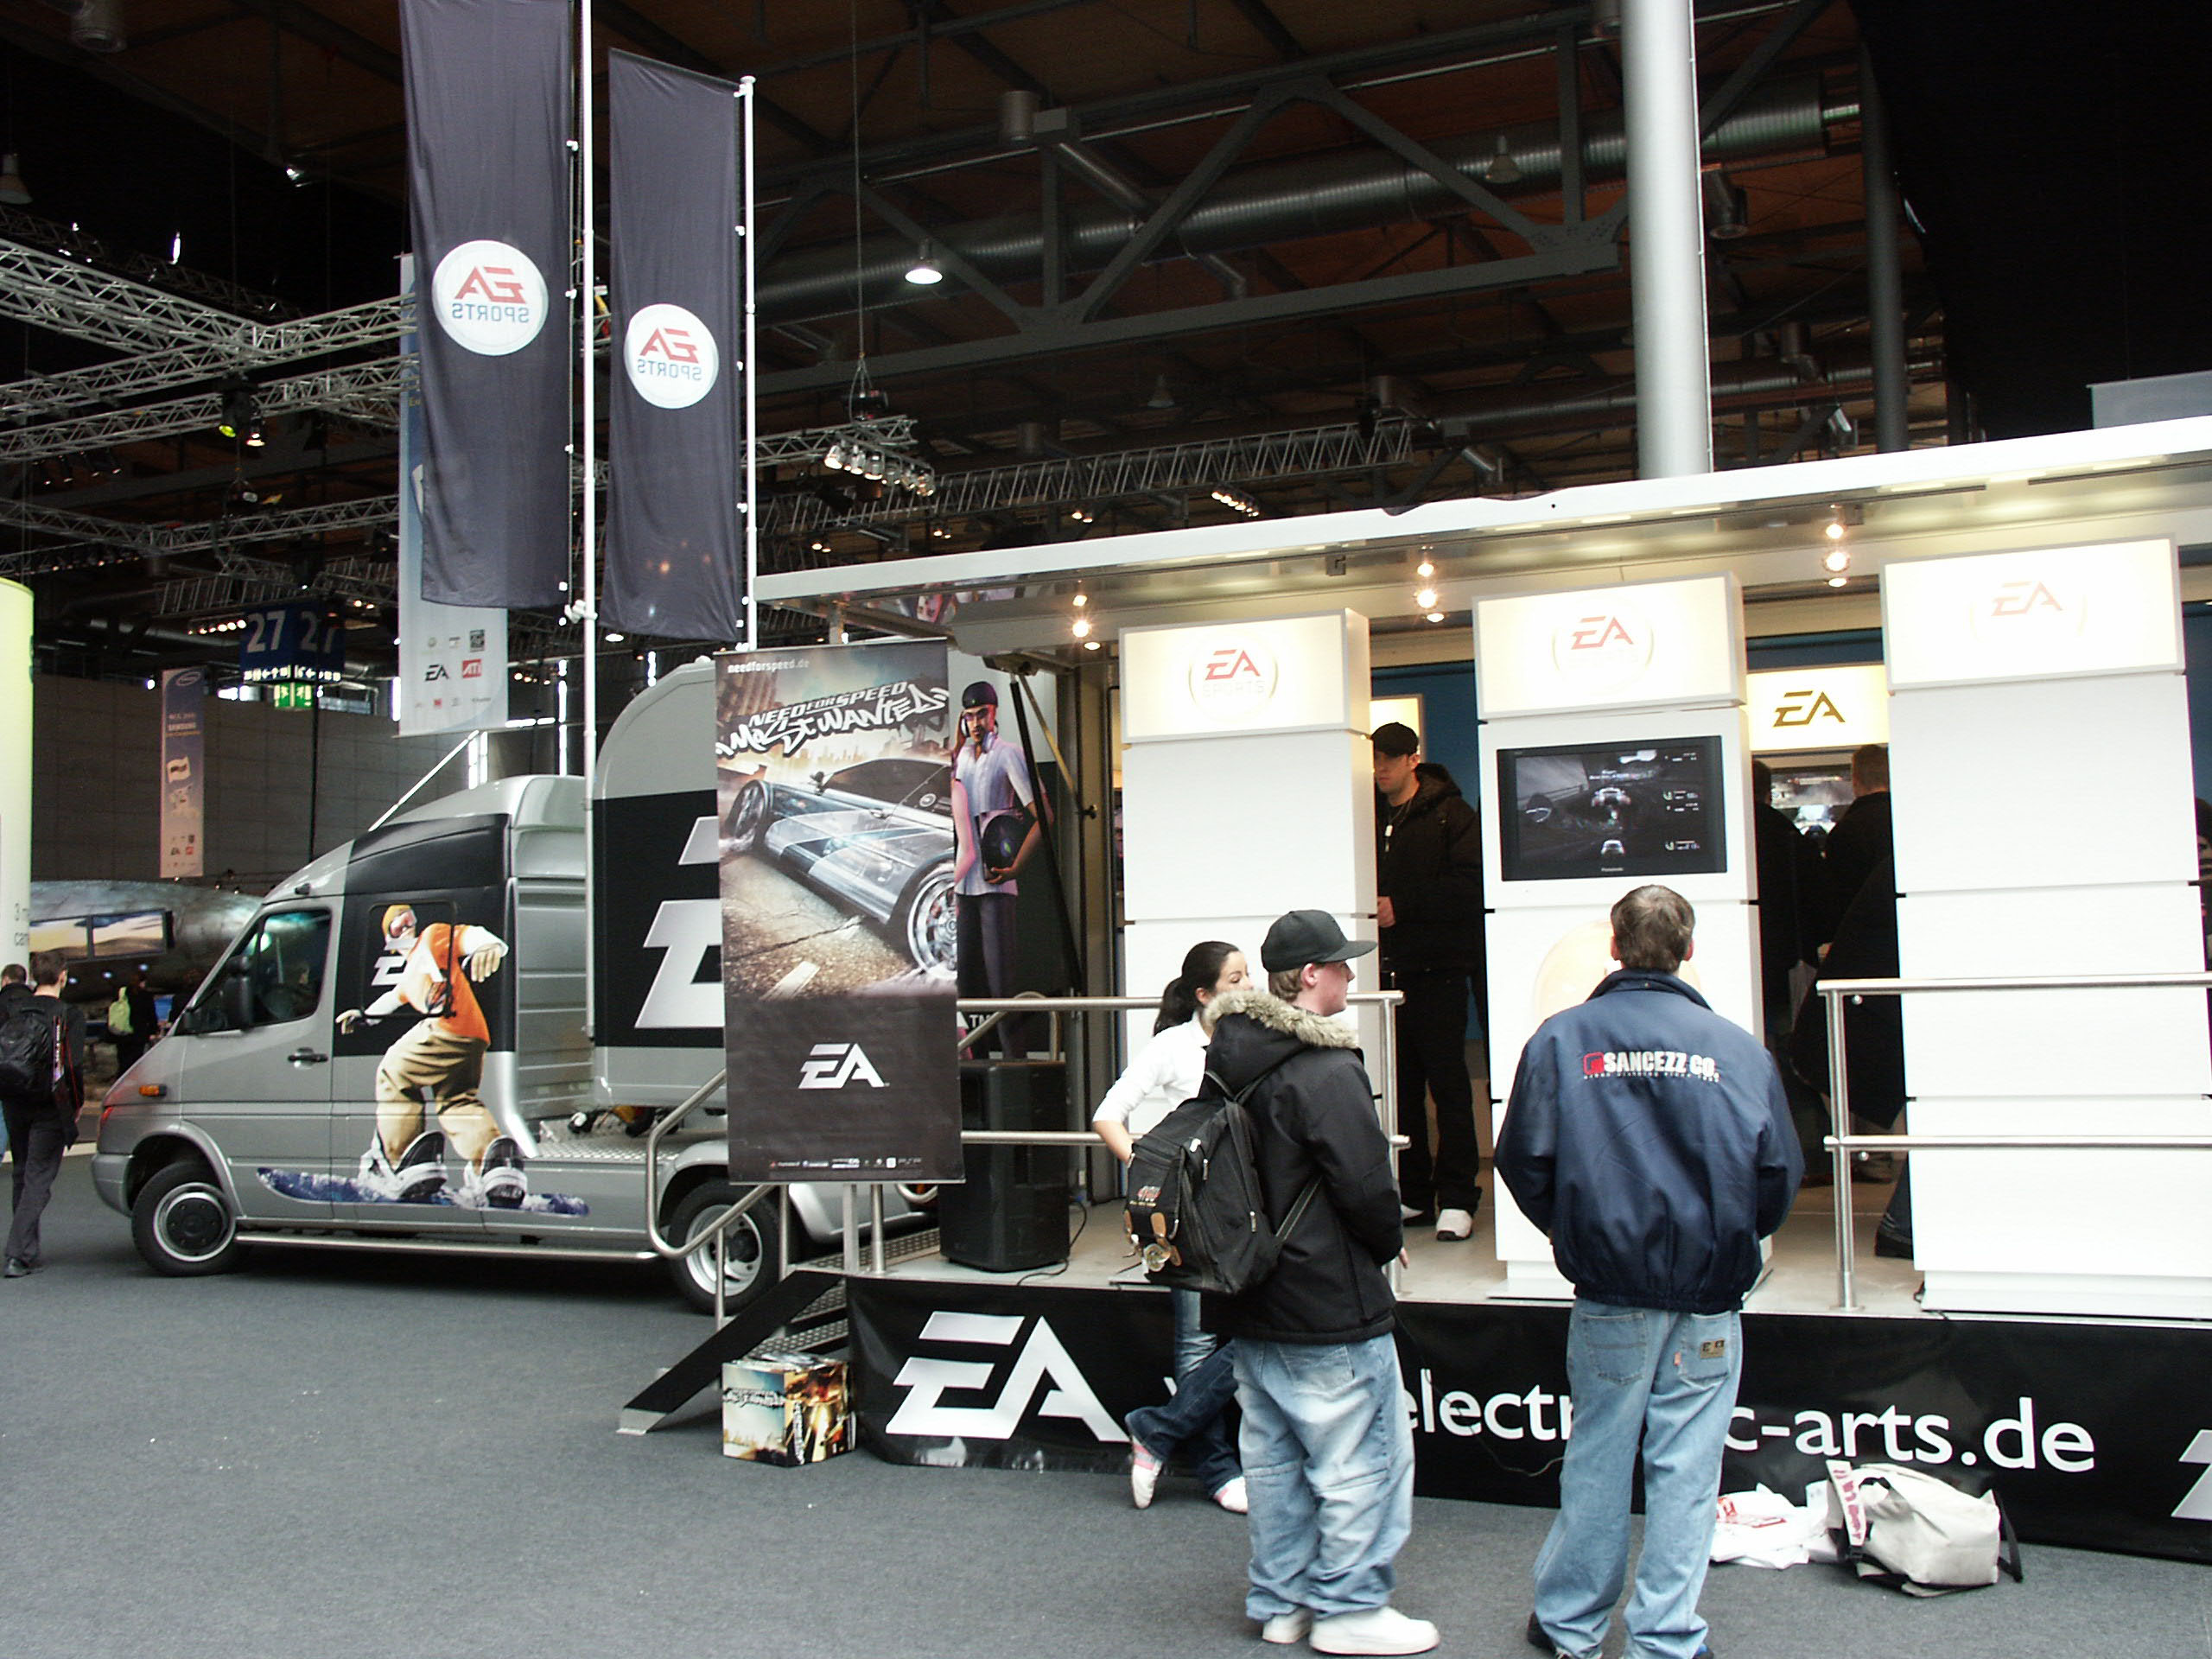 2006-03-13 - CeBIT 2006 - Hannover - 017